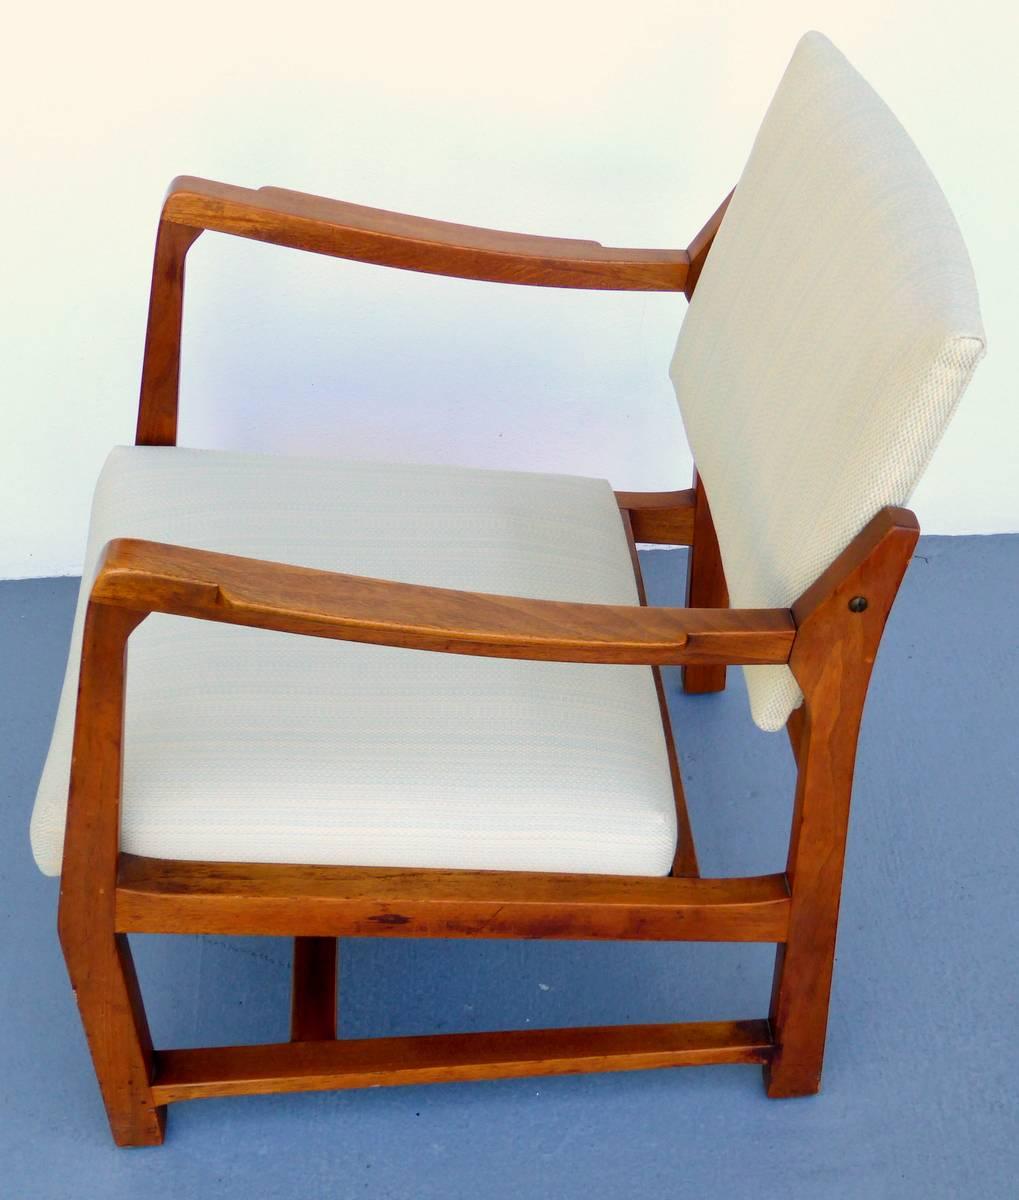 This solid walnut armchair by Edward Wormley for Dunbar is not only handsome but also comfortable, with a backrest that tilts. Nicely reupholstered in a subtle creamy pattern.

A few important notes about all items available through this 1stdibs